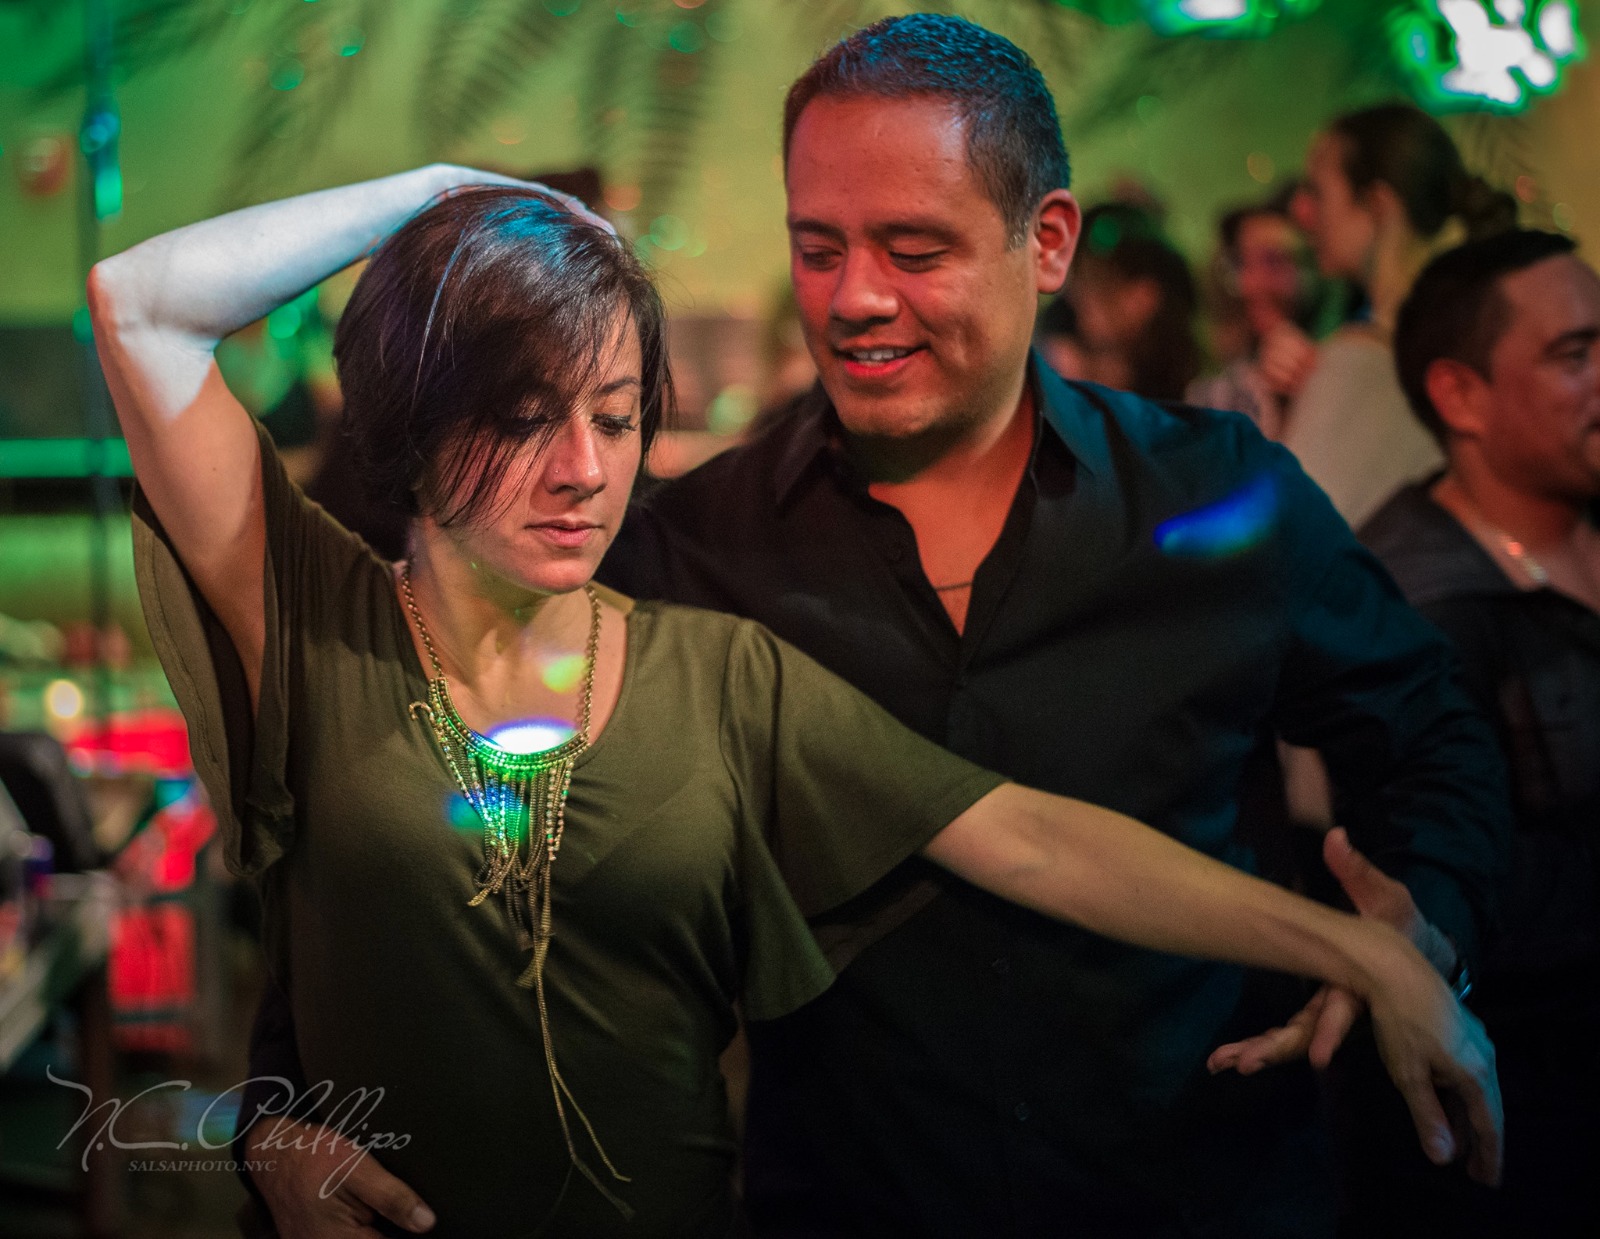 Joel & Maria share their passion and techniques to help their students ready their dancing goals at Joel Salsa NYC